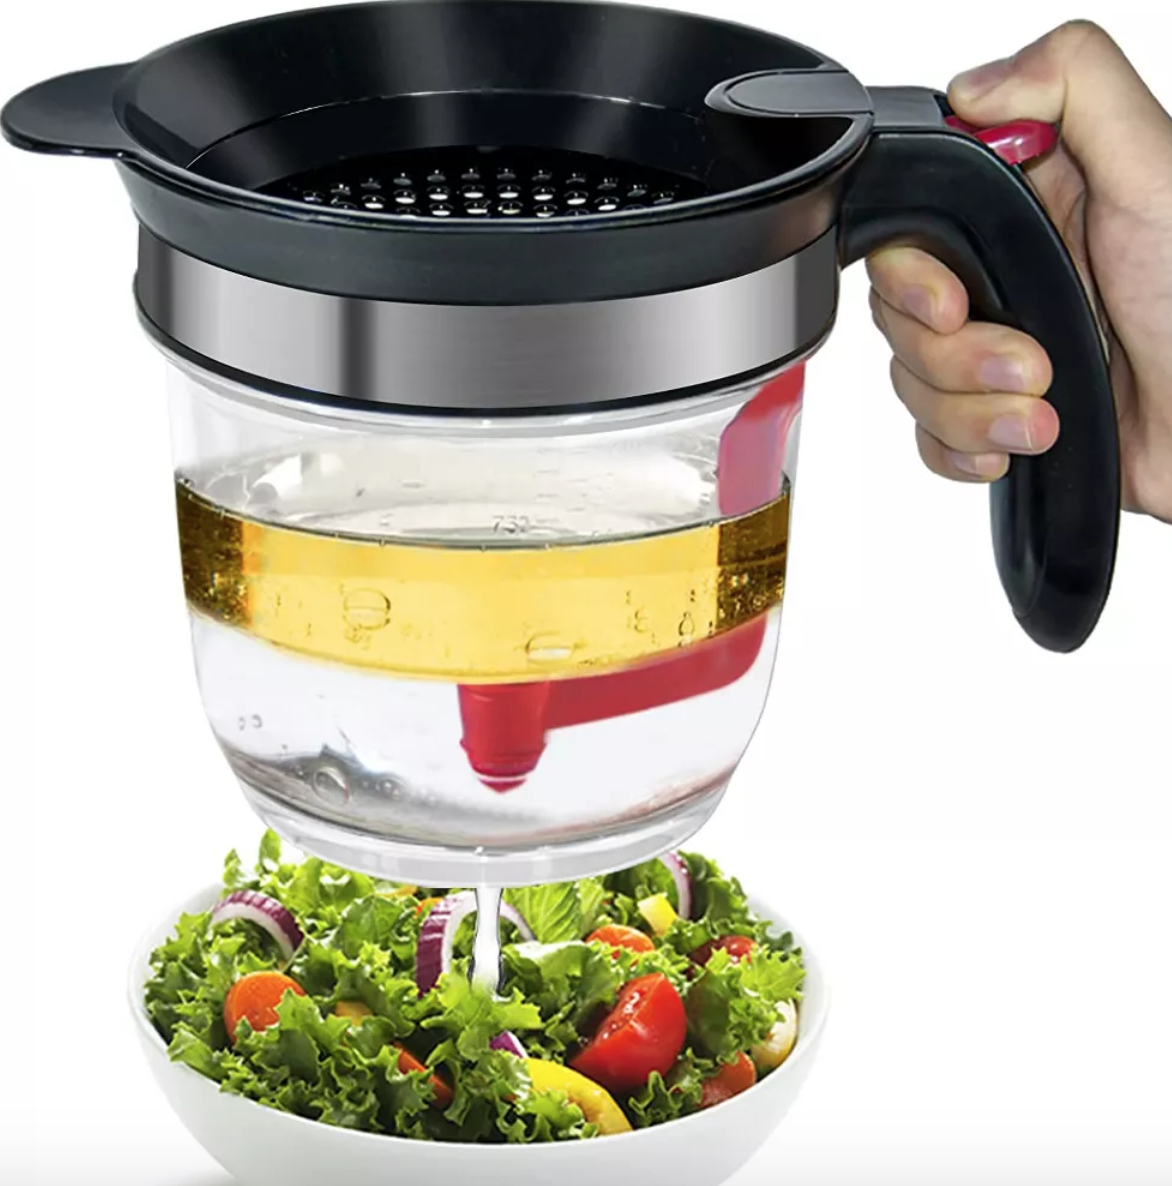 a fat separating device dispensing oil over a salad